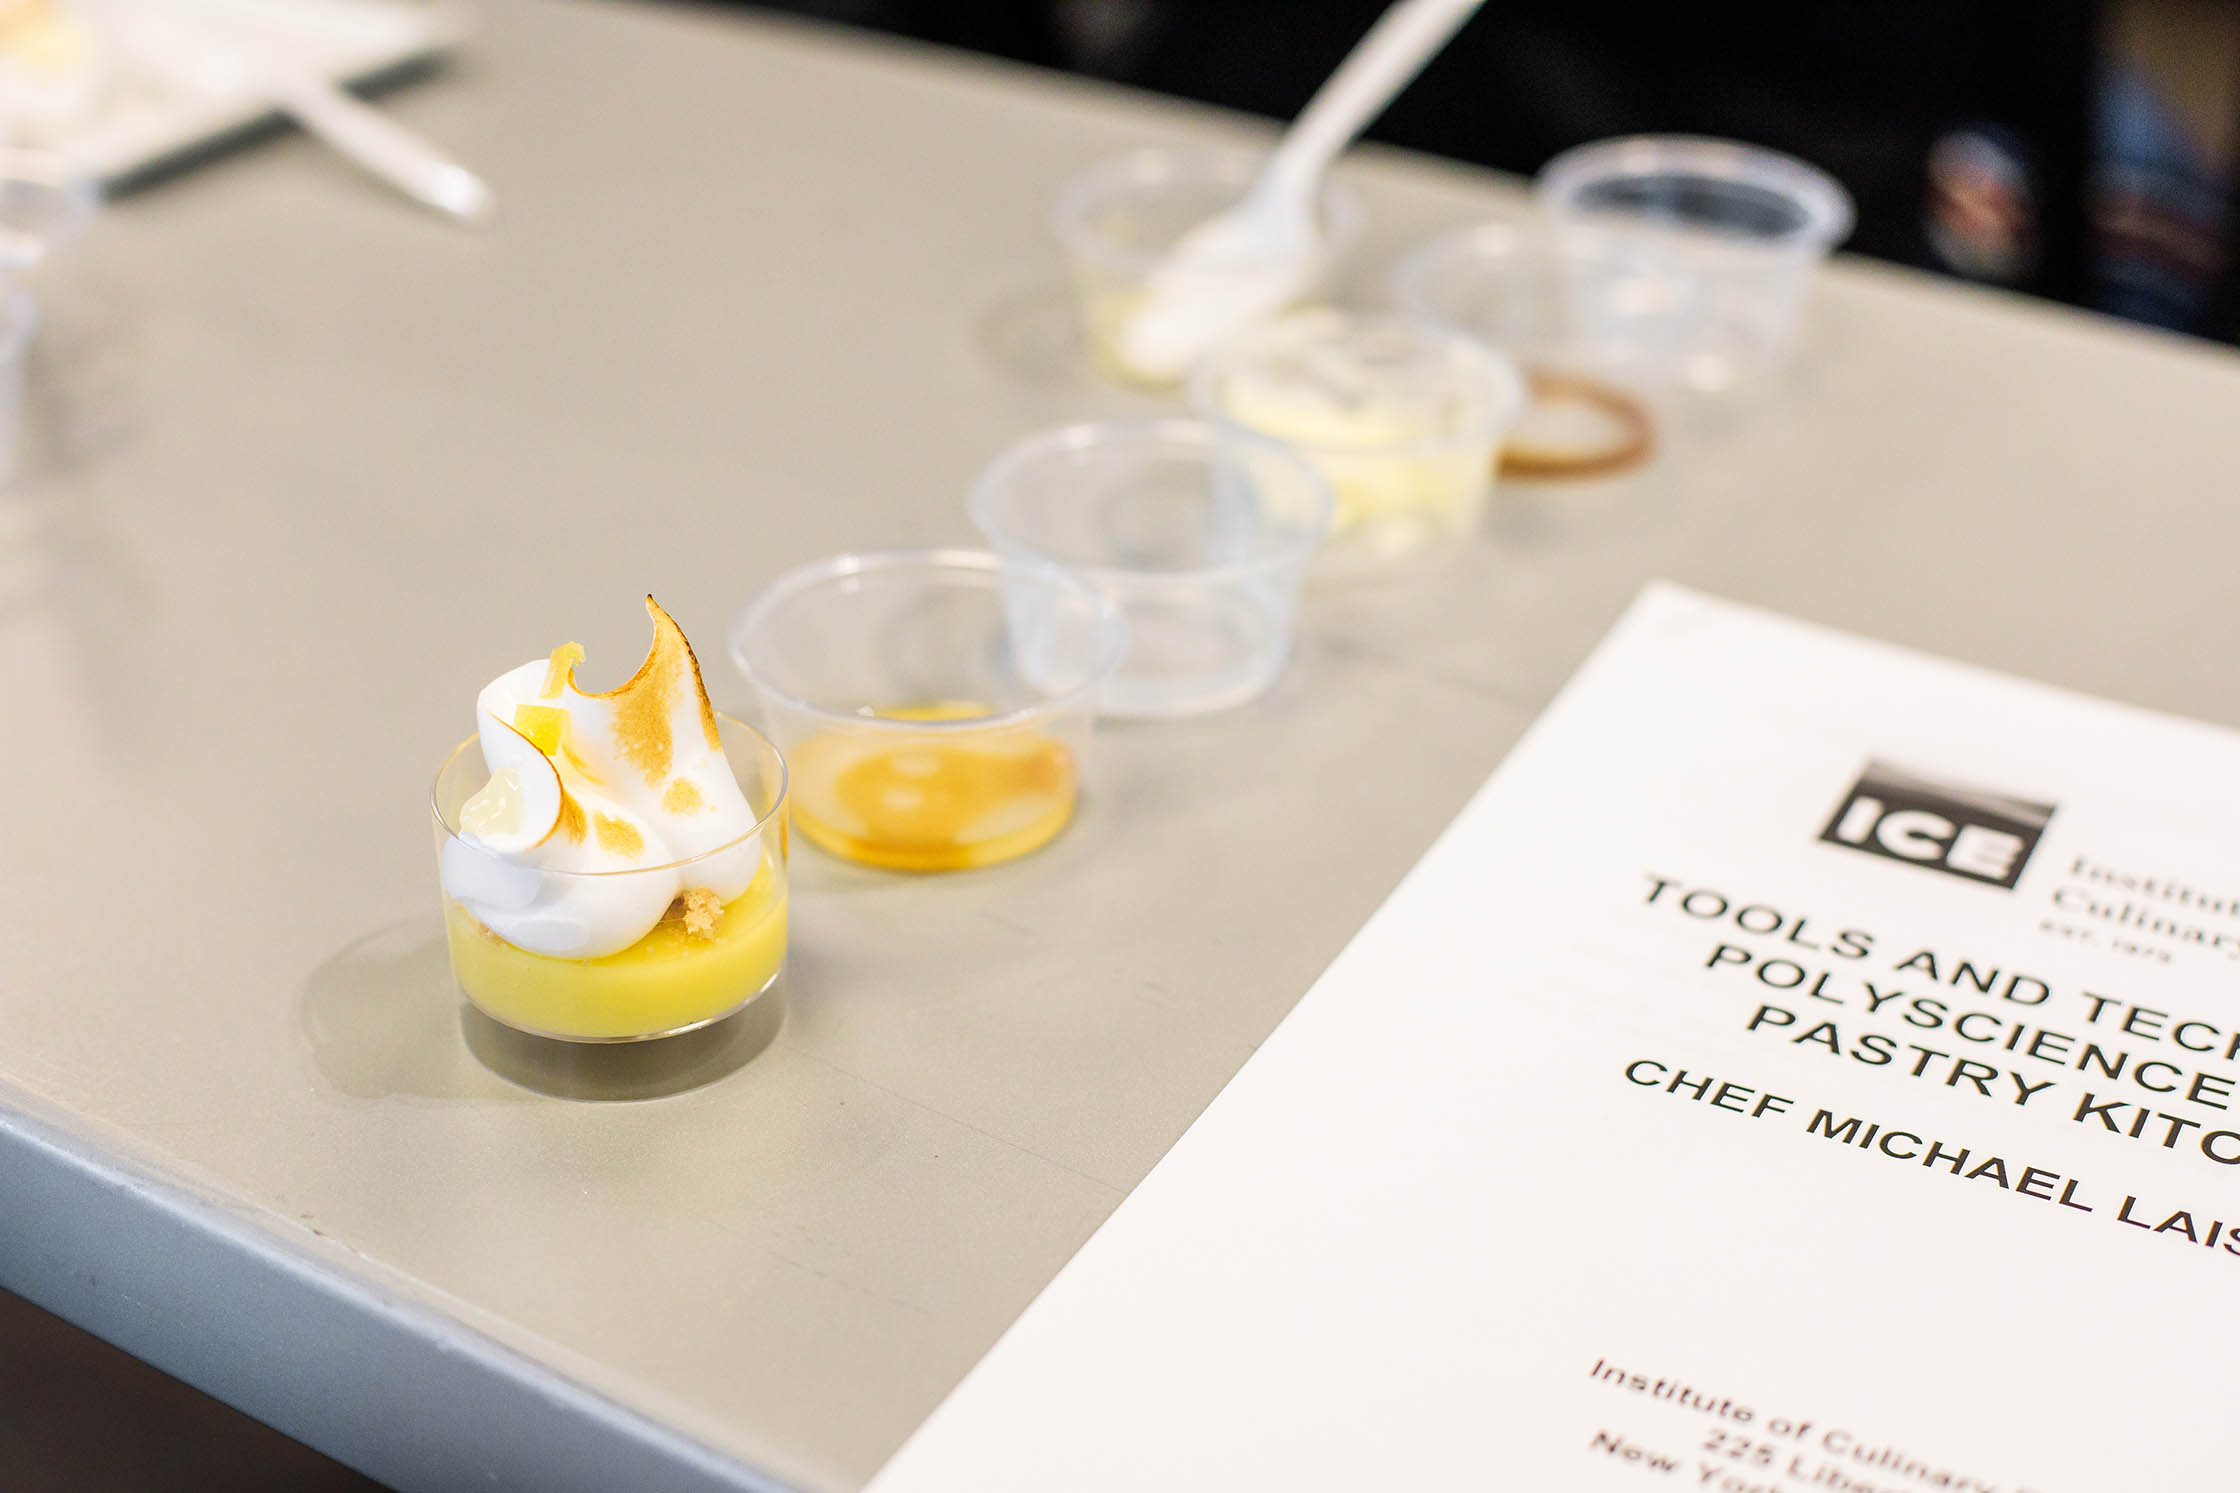 Chef Michael demonstrated his PolyScience tests for students at ICE New York and offered samples of each result.